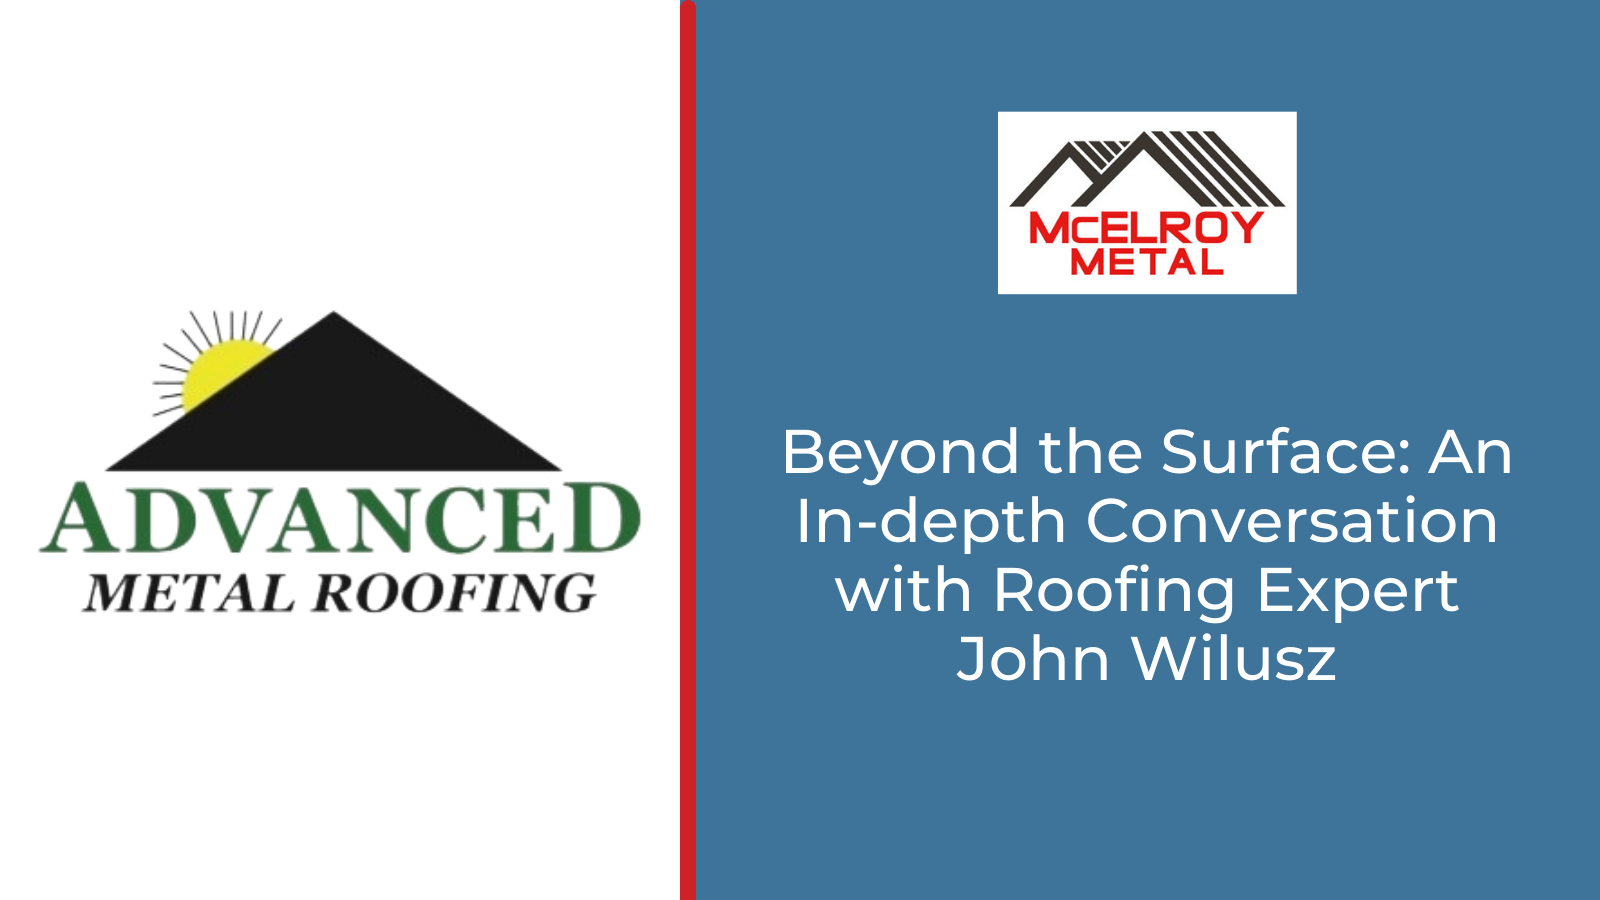 Beyond the Surface: An In-depth Conversation with Roofing Expert John Wilusz